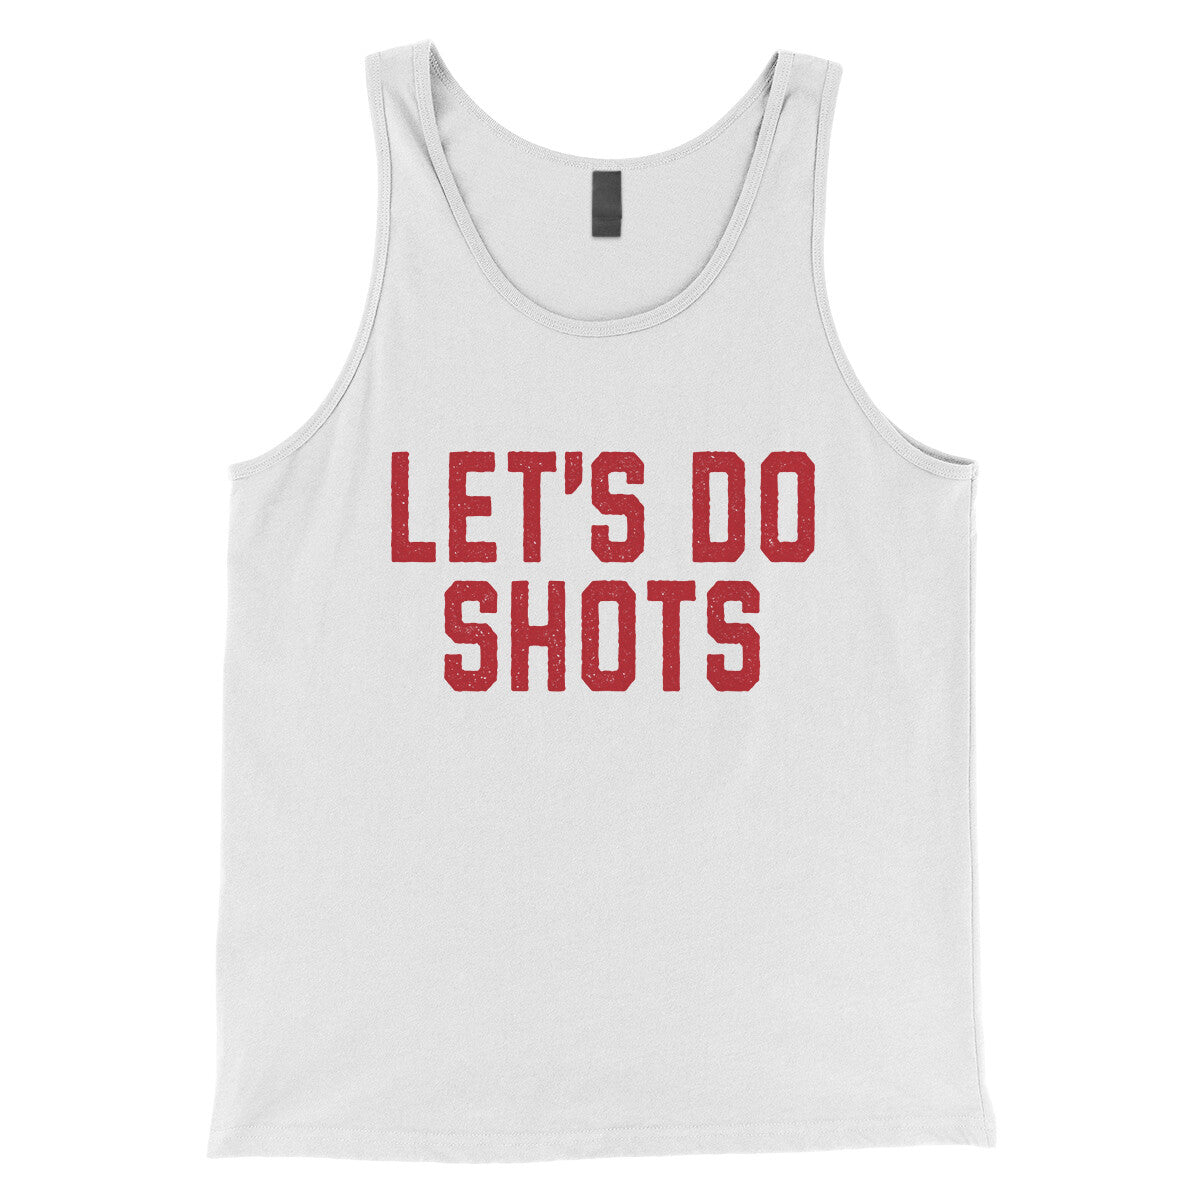 Let's Do Shots in White Color